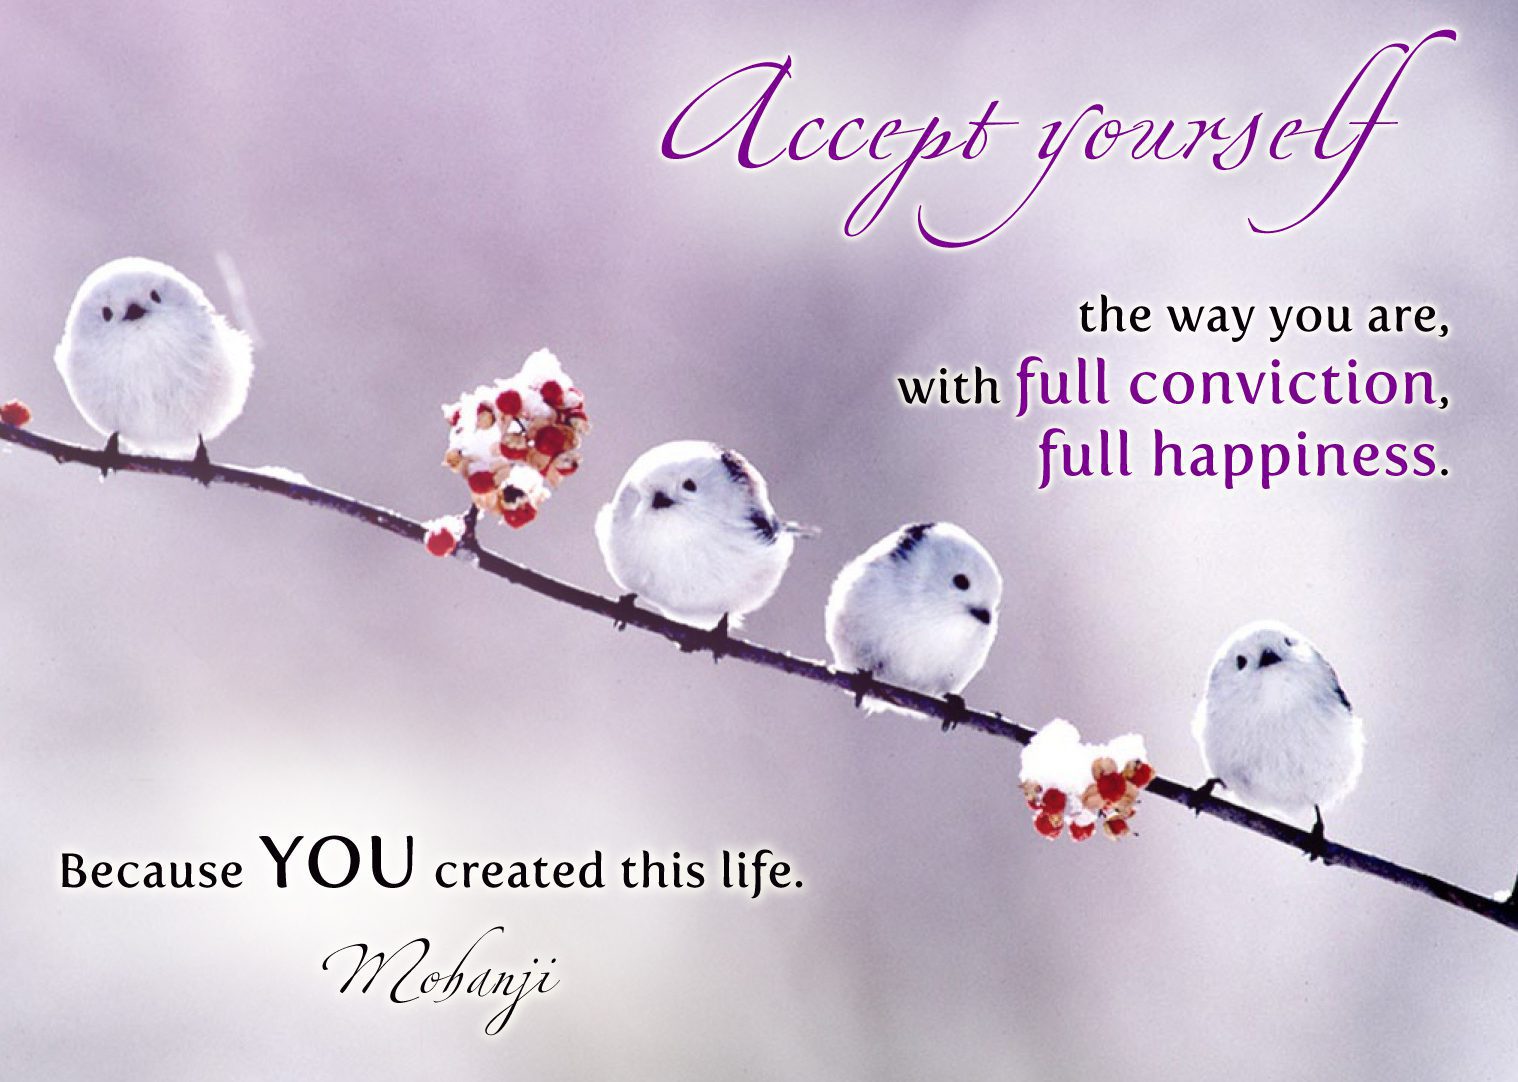 Mohanji quote - Accept yourself the way you are